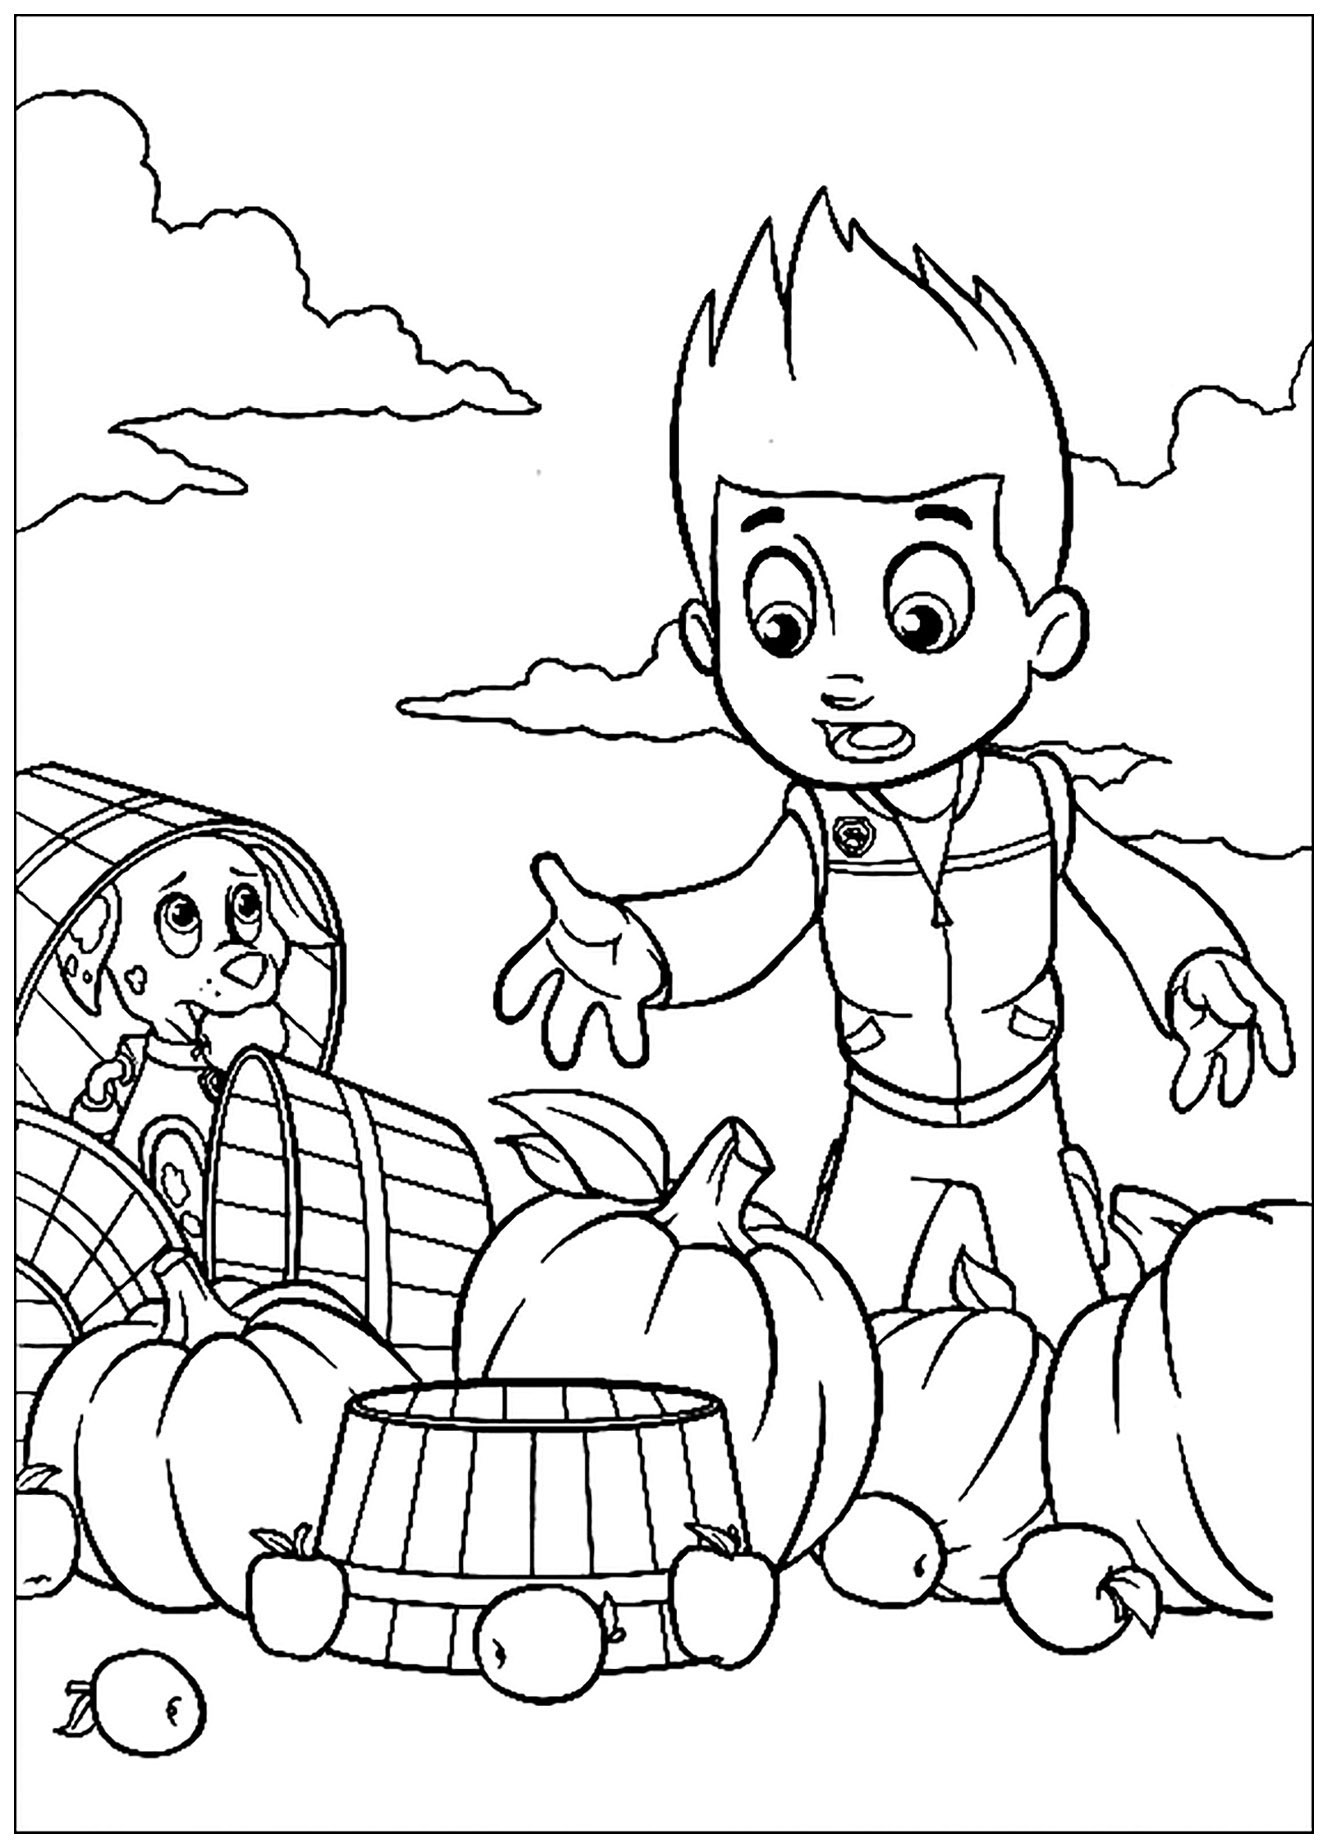 Beautiful Patrol coloring page, simple, for children : Ryder is not happy